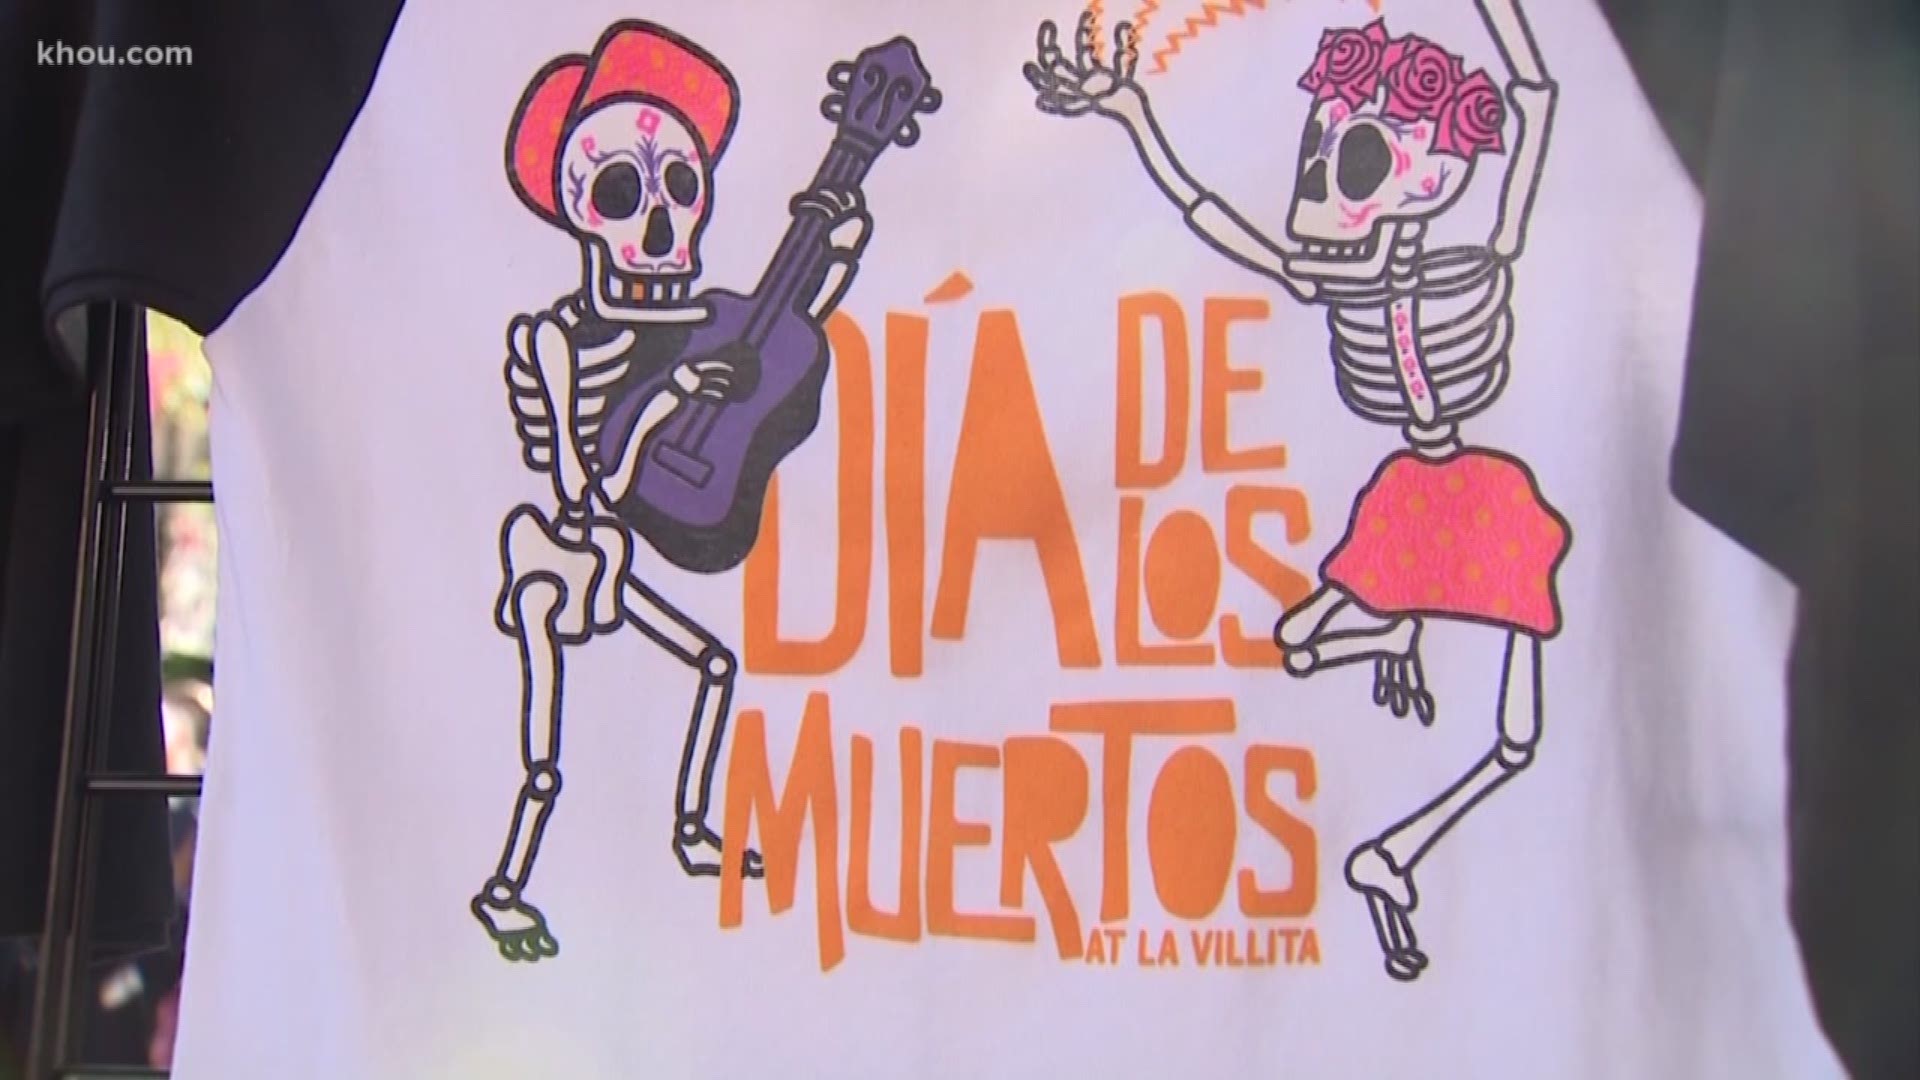 Halloween is coming to an end and Dia de los Muertos is just about to start up. It's a holiday that begain in Mexico meant to honor the deadly departed.